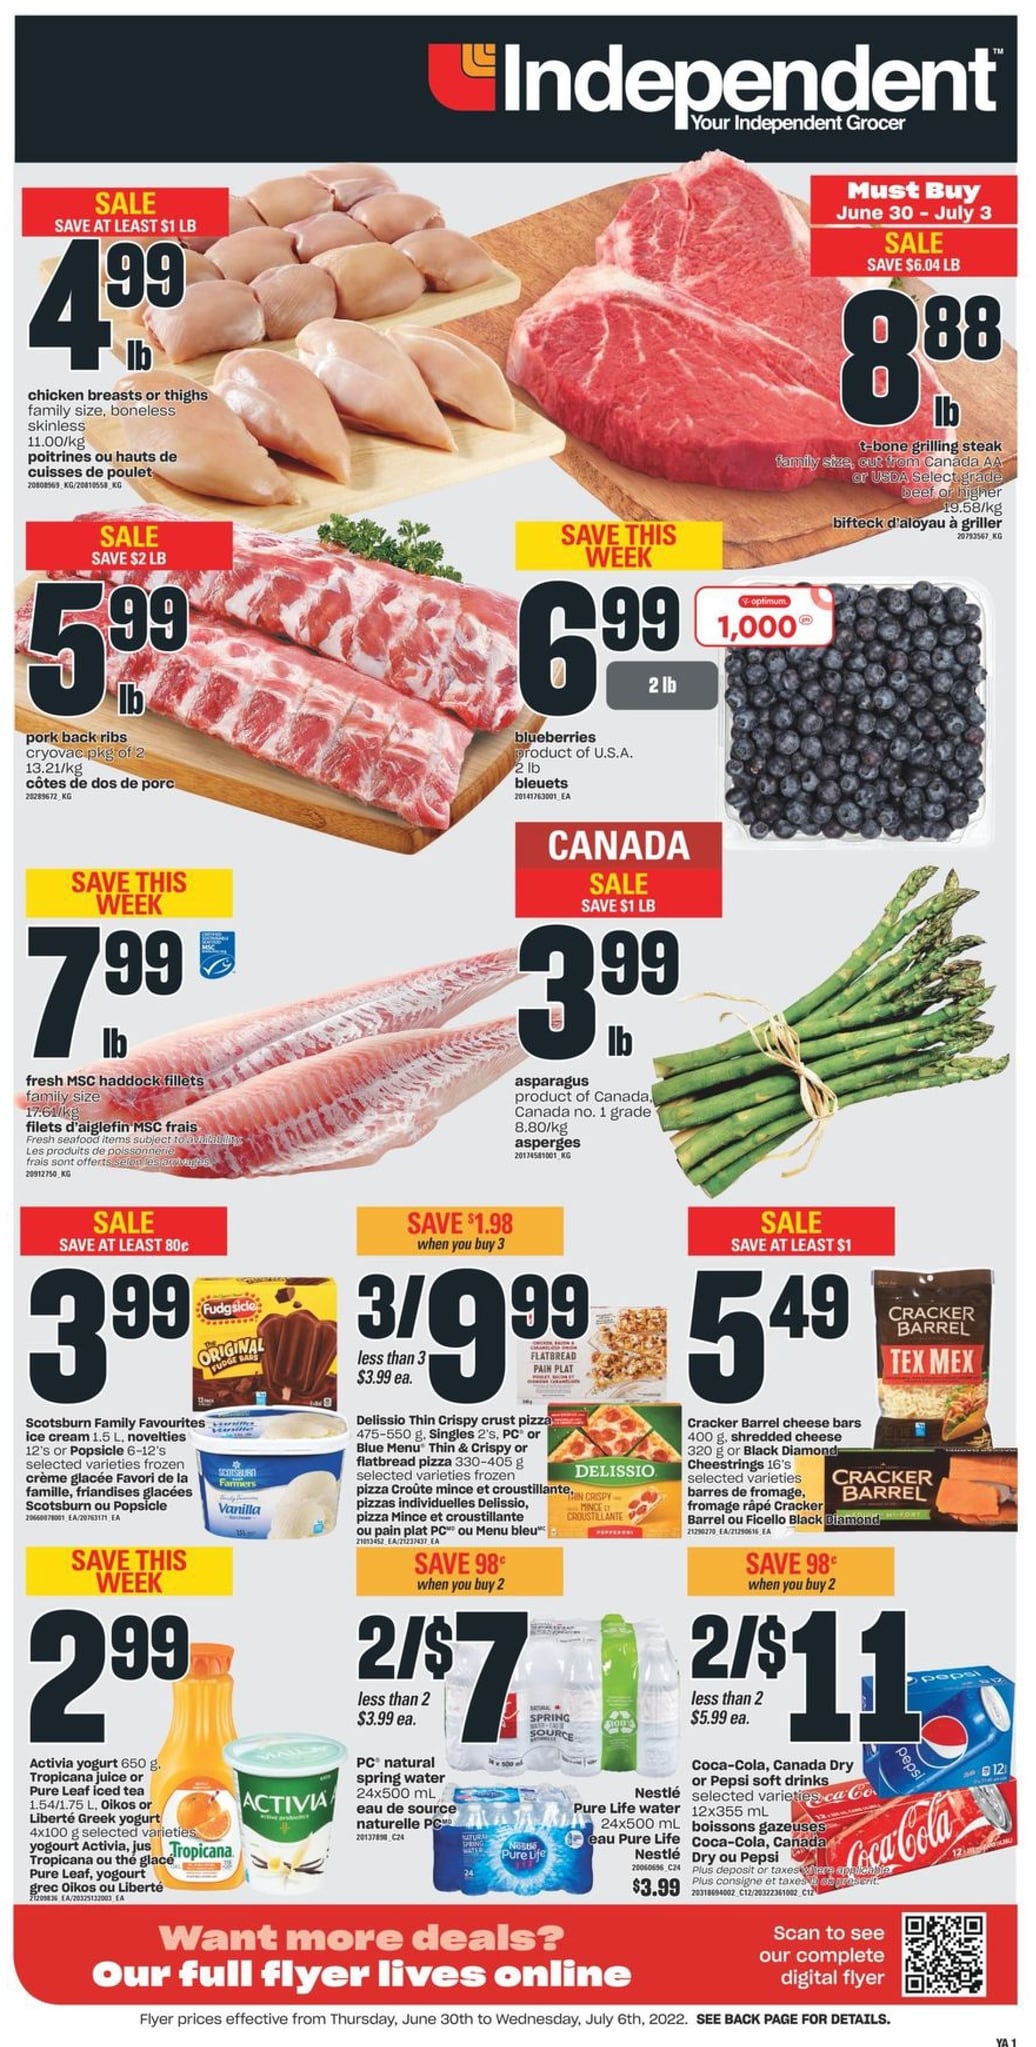 Independent Atlantic - Weekly Flyer Specials - Page 2